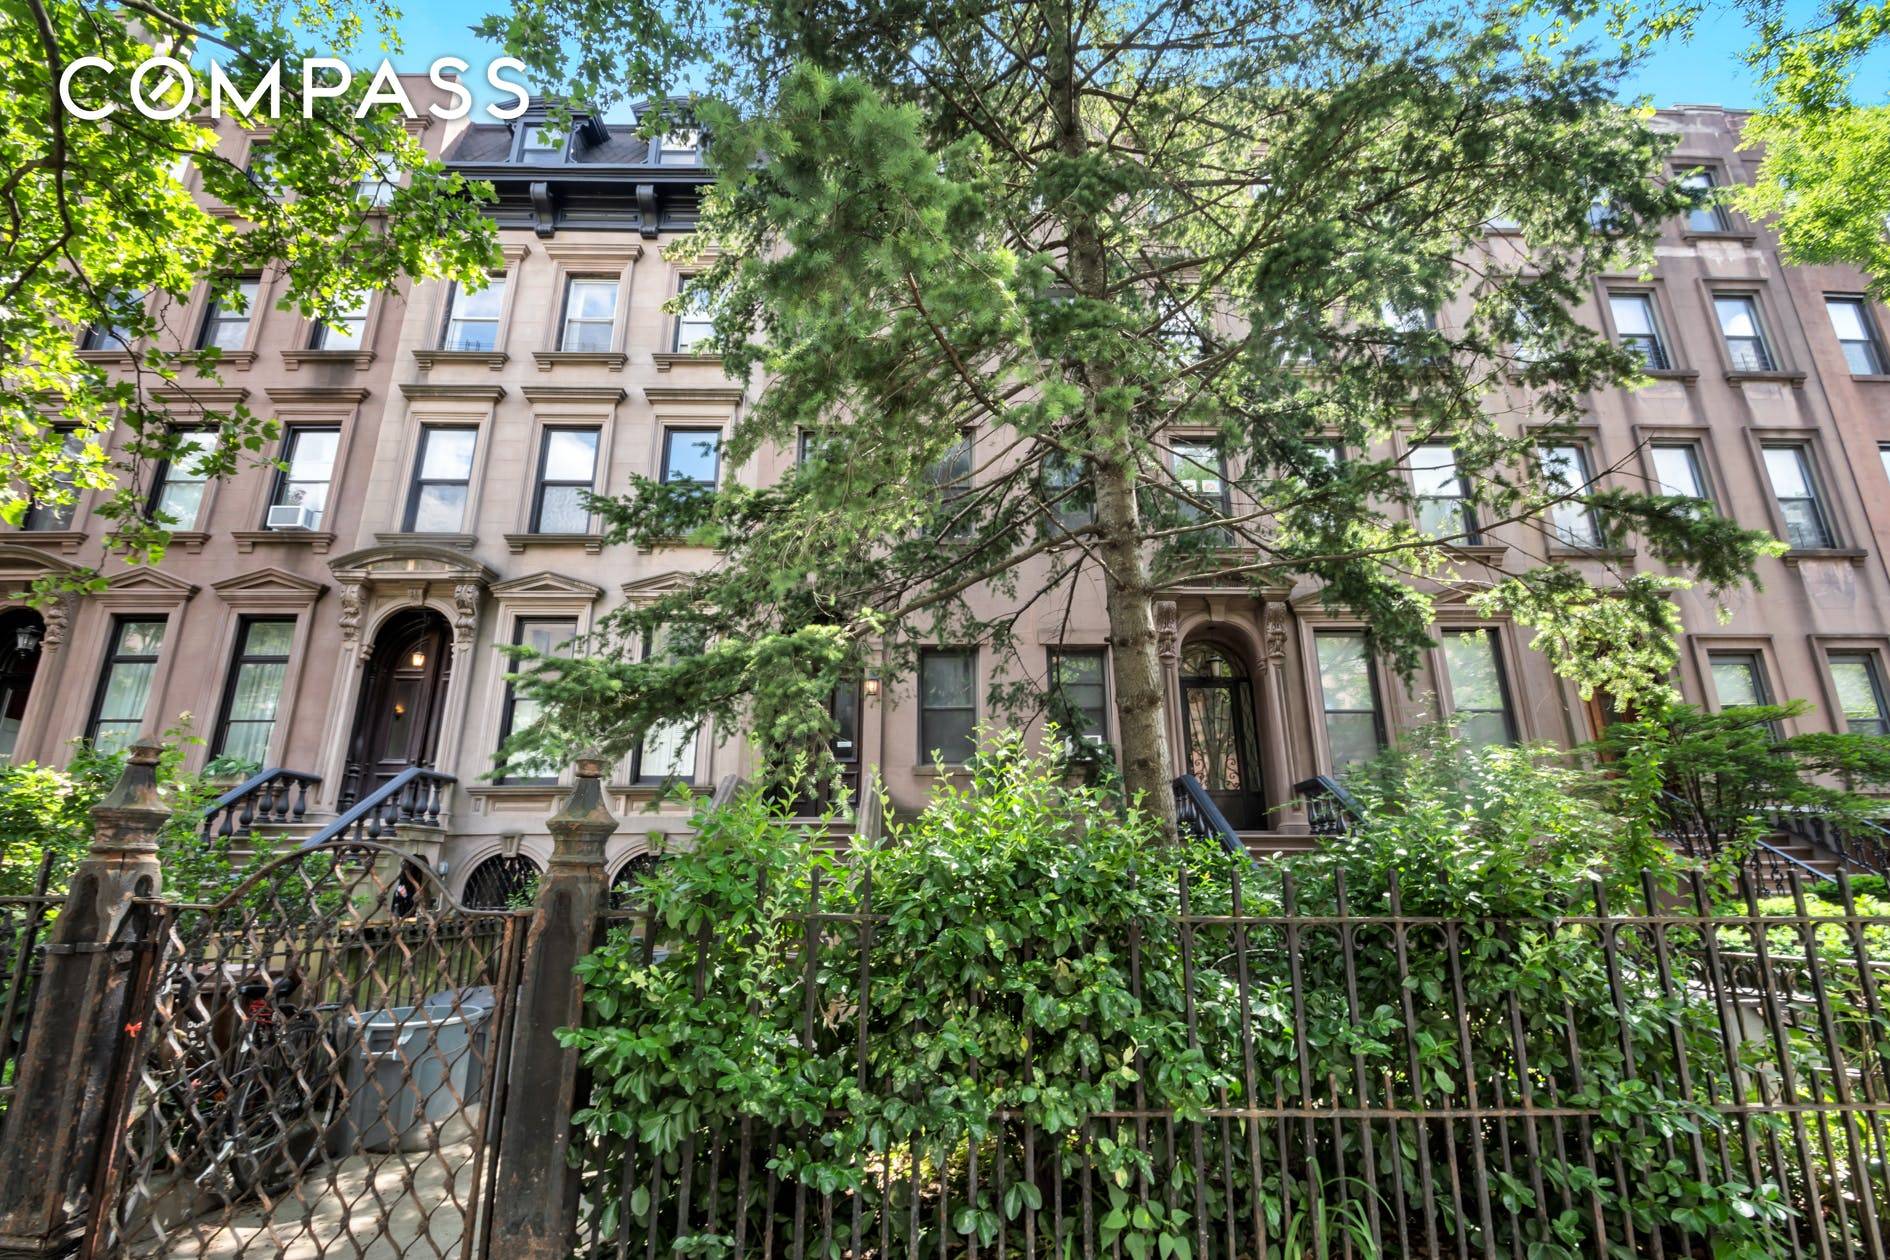 CARROLL GARDENS Brownstone AVAILABLE FOR SALE INVESTMENT OPPORTUNITY Located on one of the most Prestigious Front Yard Blocks, is this Classic ornate, Beautiful 5 Family, 5 Story Brownstone.